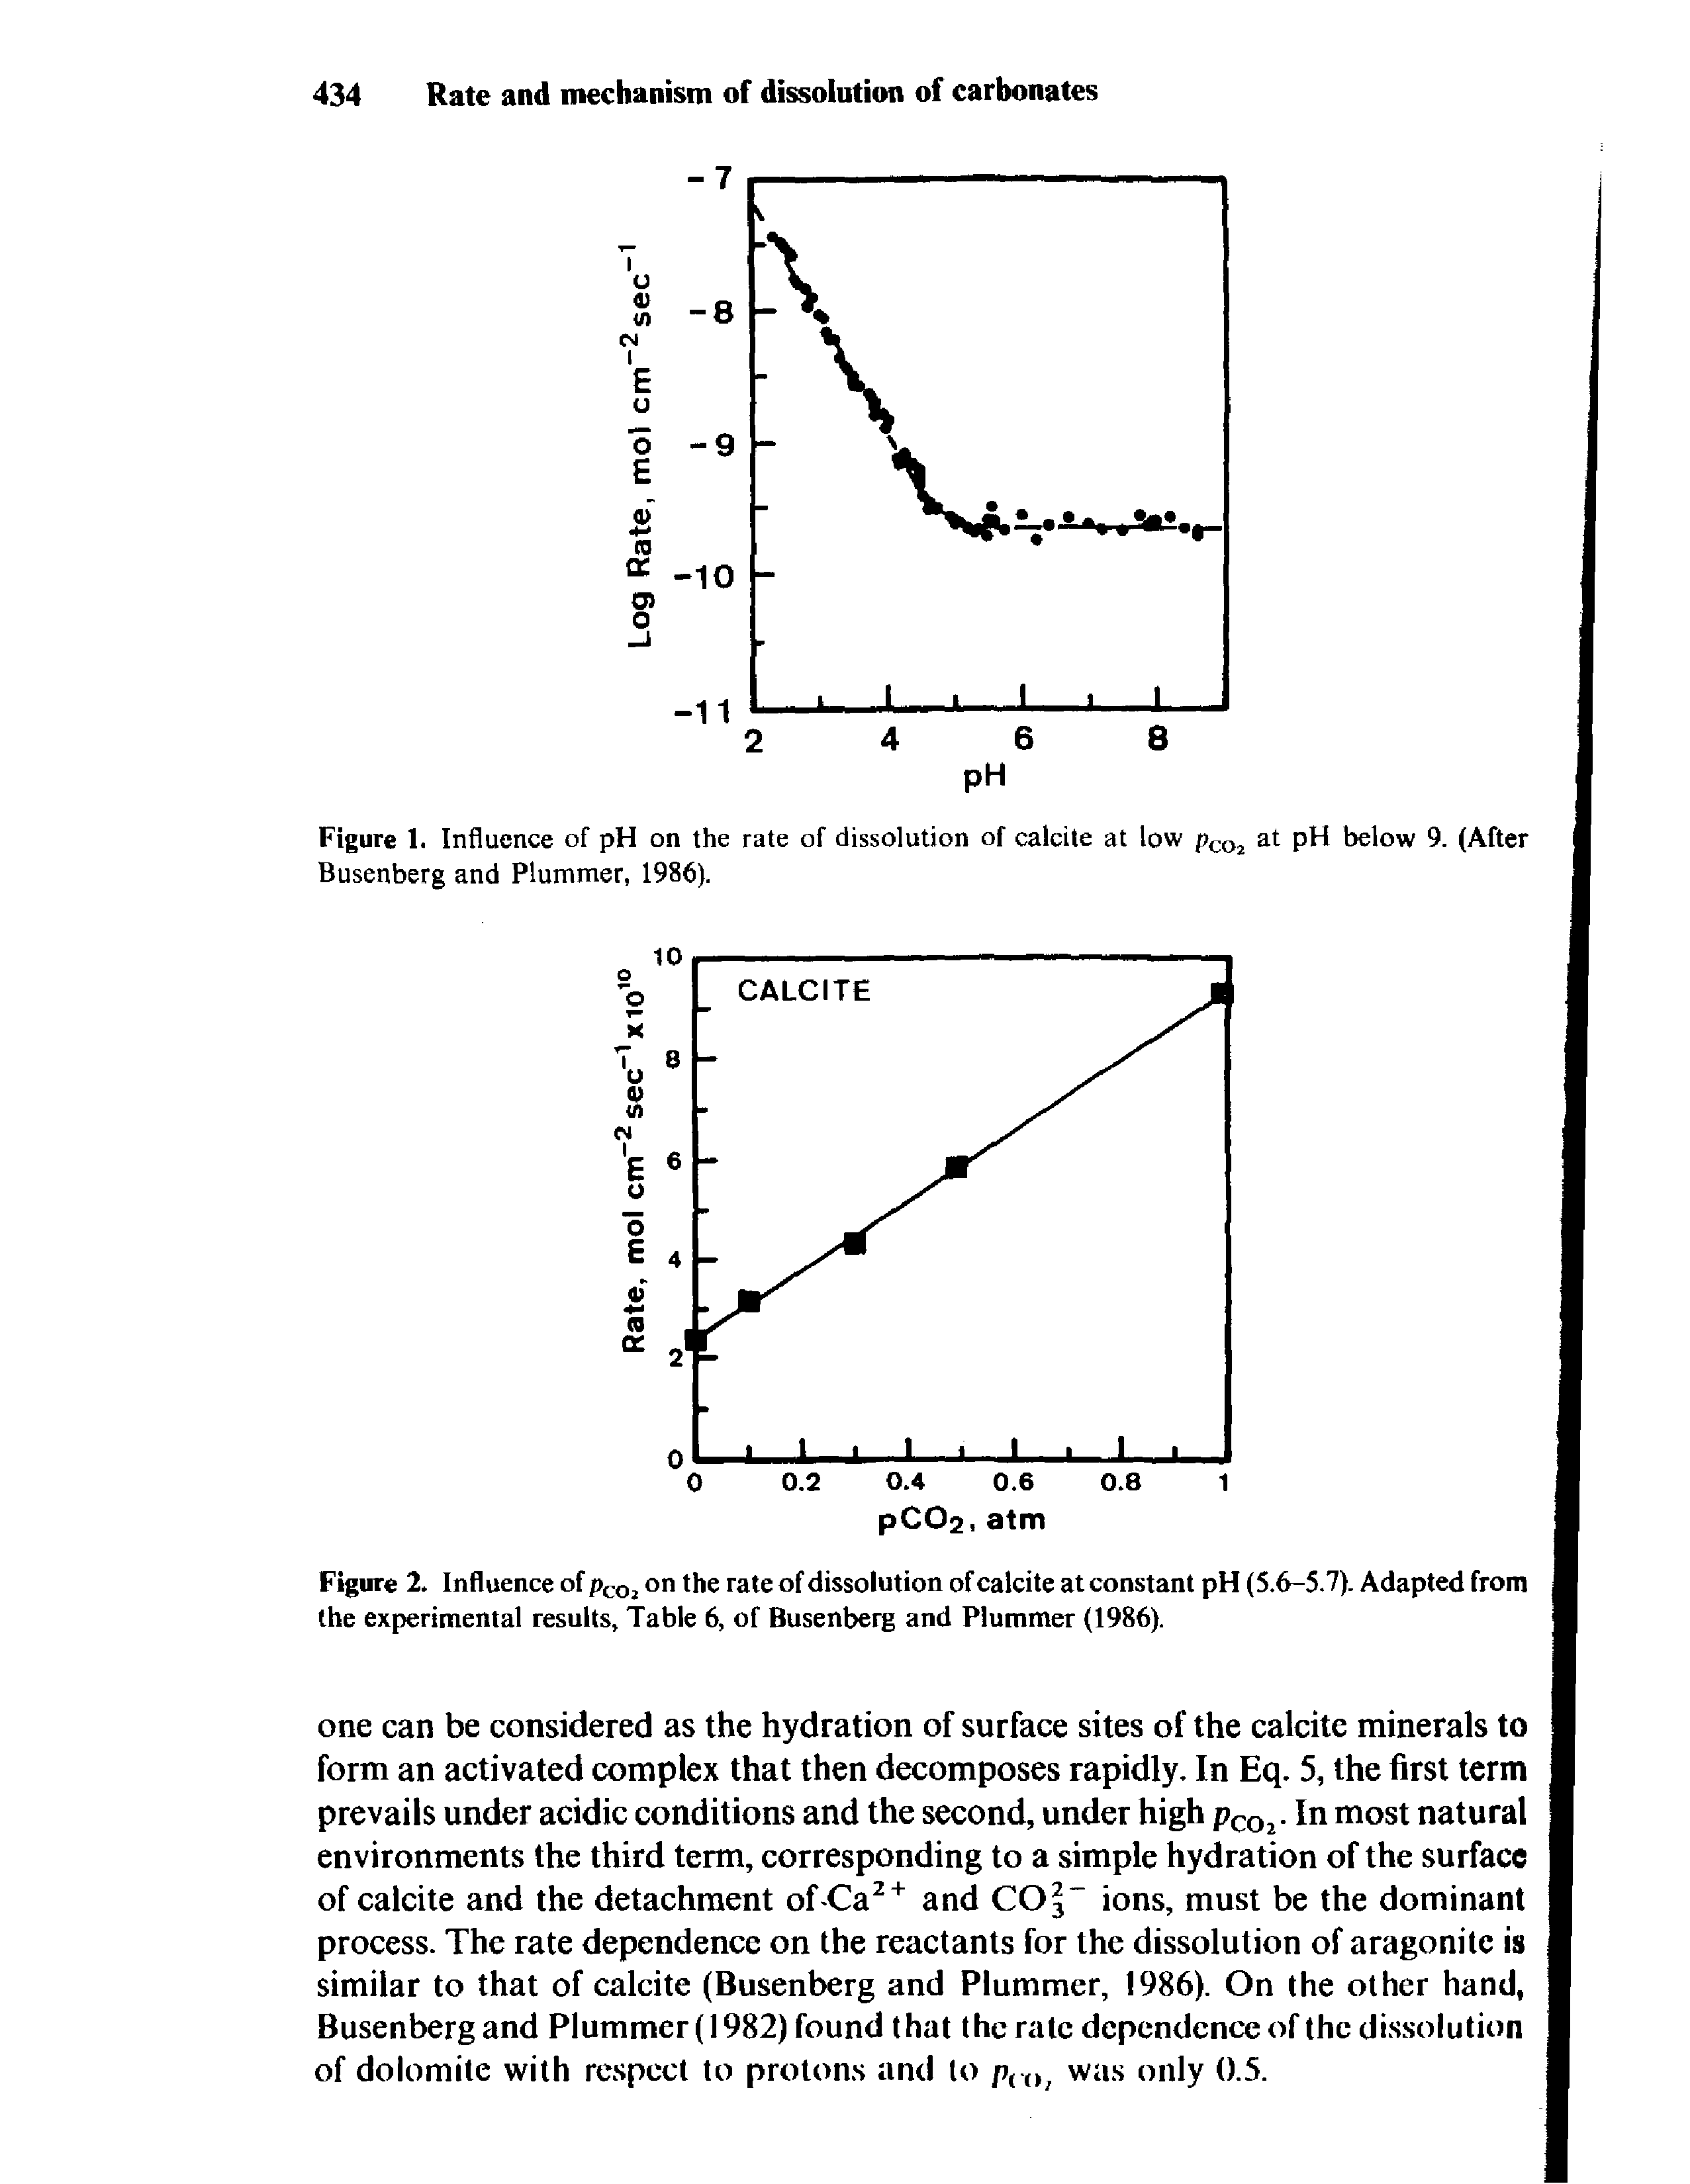 Figure 2. Influence of pCOi on the rate of dissolution of calcite at constant pH (S.6-5.7). Adapted from the experimental results, Table 6, of Busenberg and Plummer (1986).